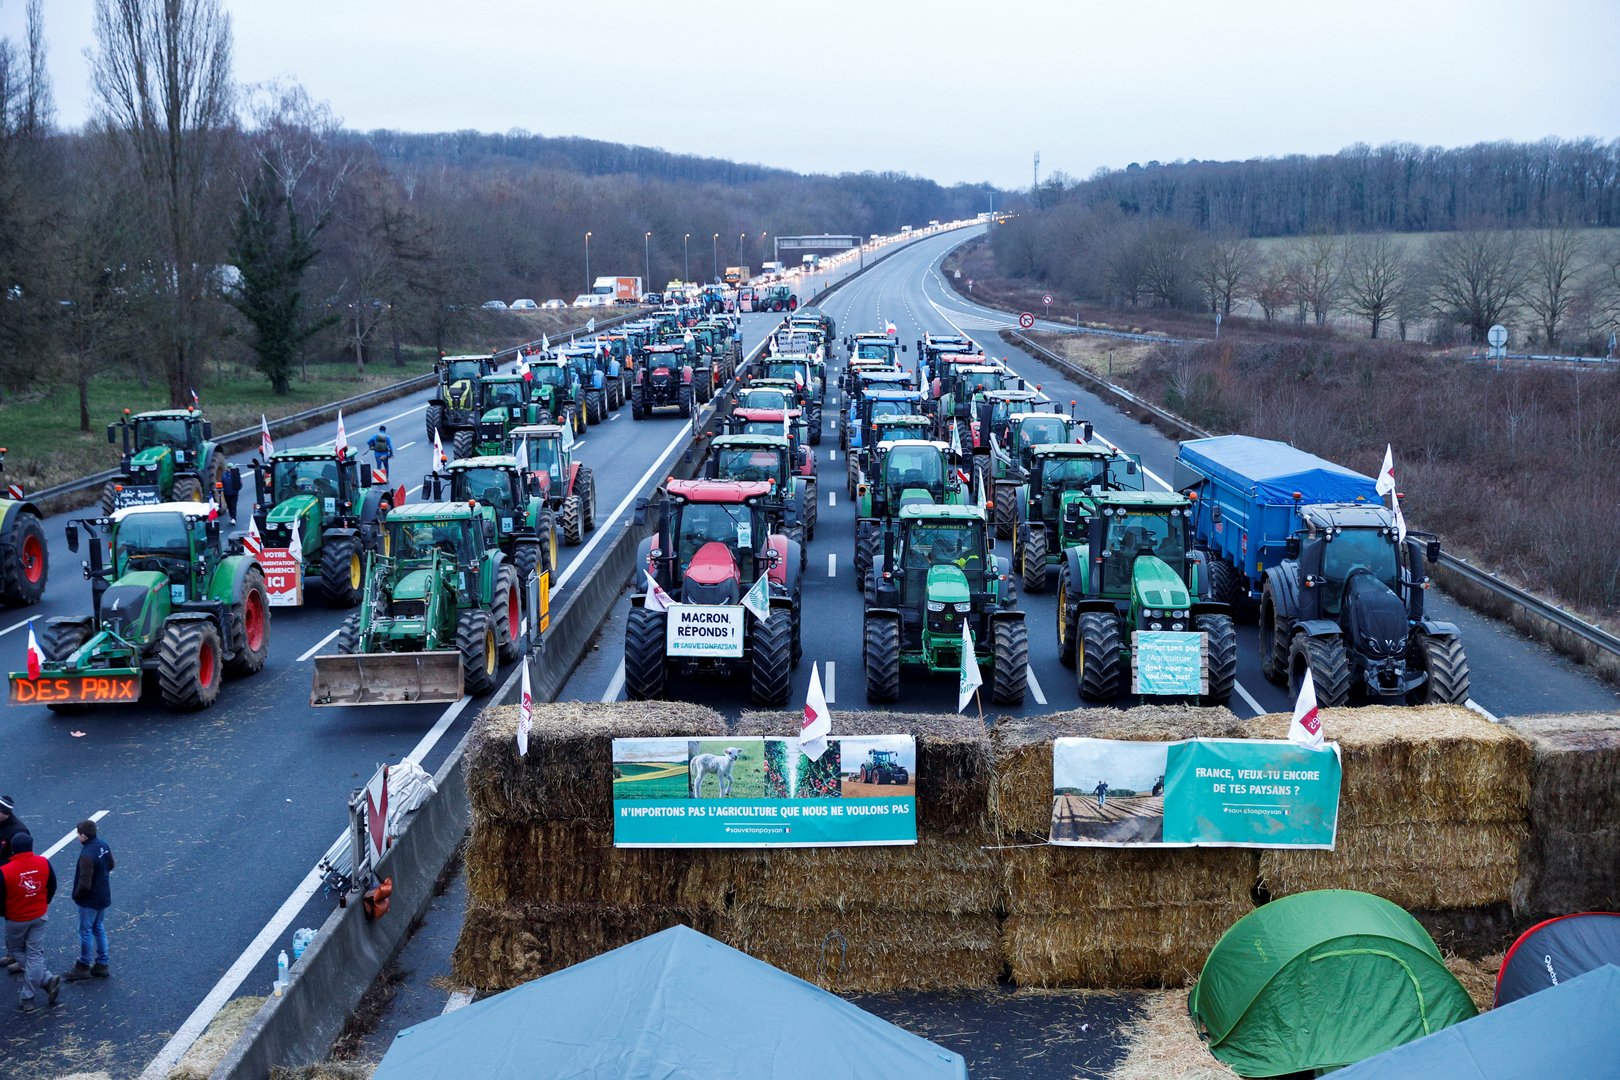 image Why are French farmers protesting?